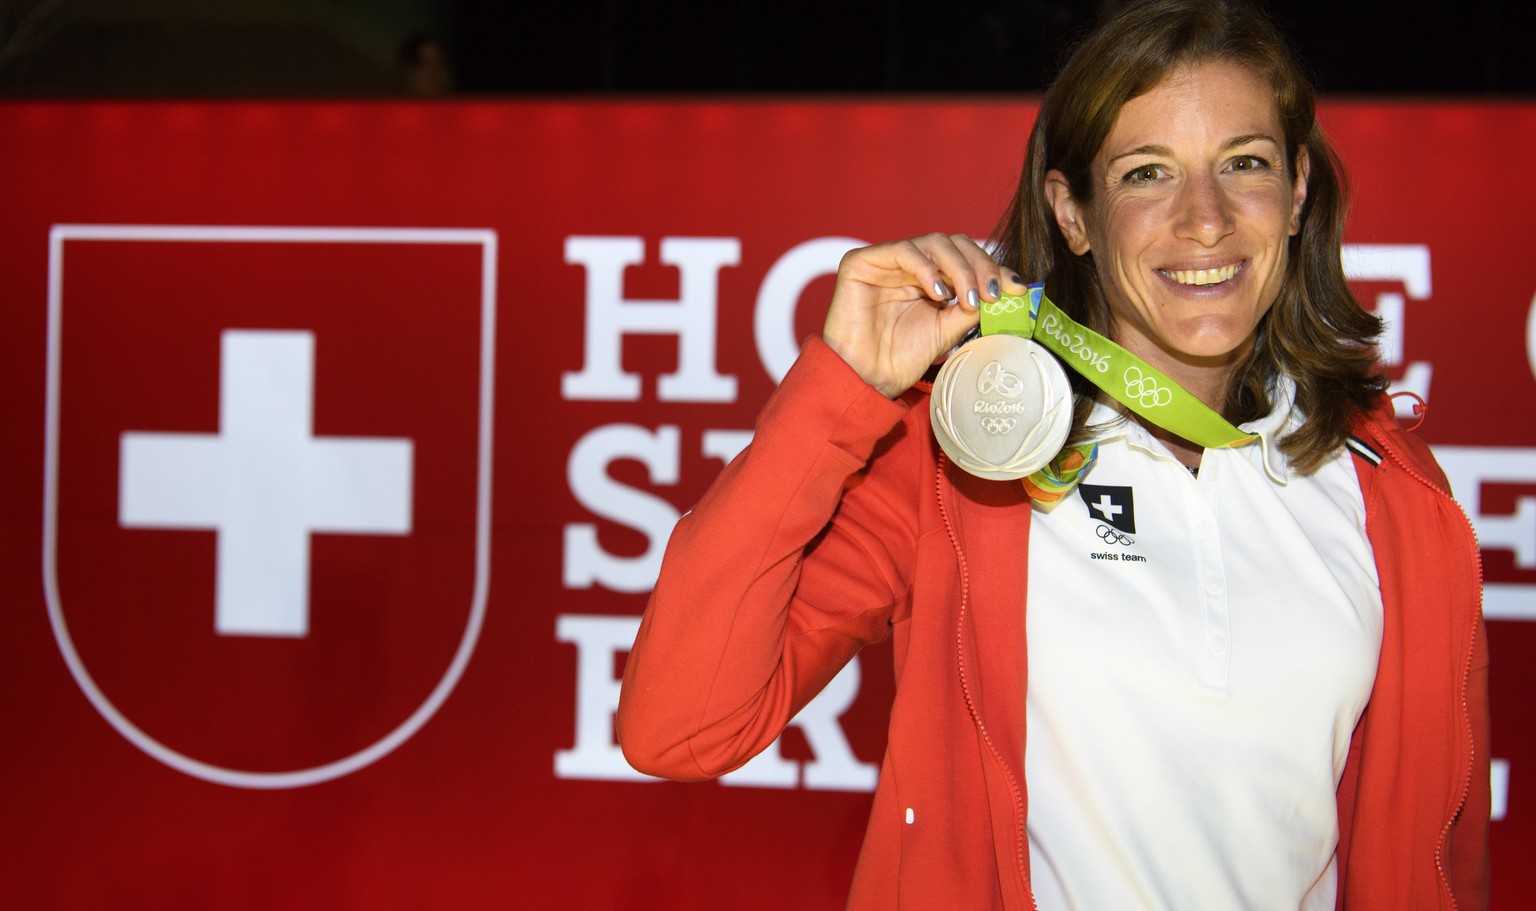 Nicola Spirig of Switzerland celebrates her silver medal in the womenÕs Triathlon in the House of Switzerland at the Rio 2016 Olympic Games in Rio de Janeiro, Brazil, on Saturday, August 20, 2016. (KE ...